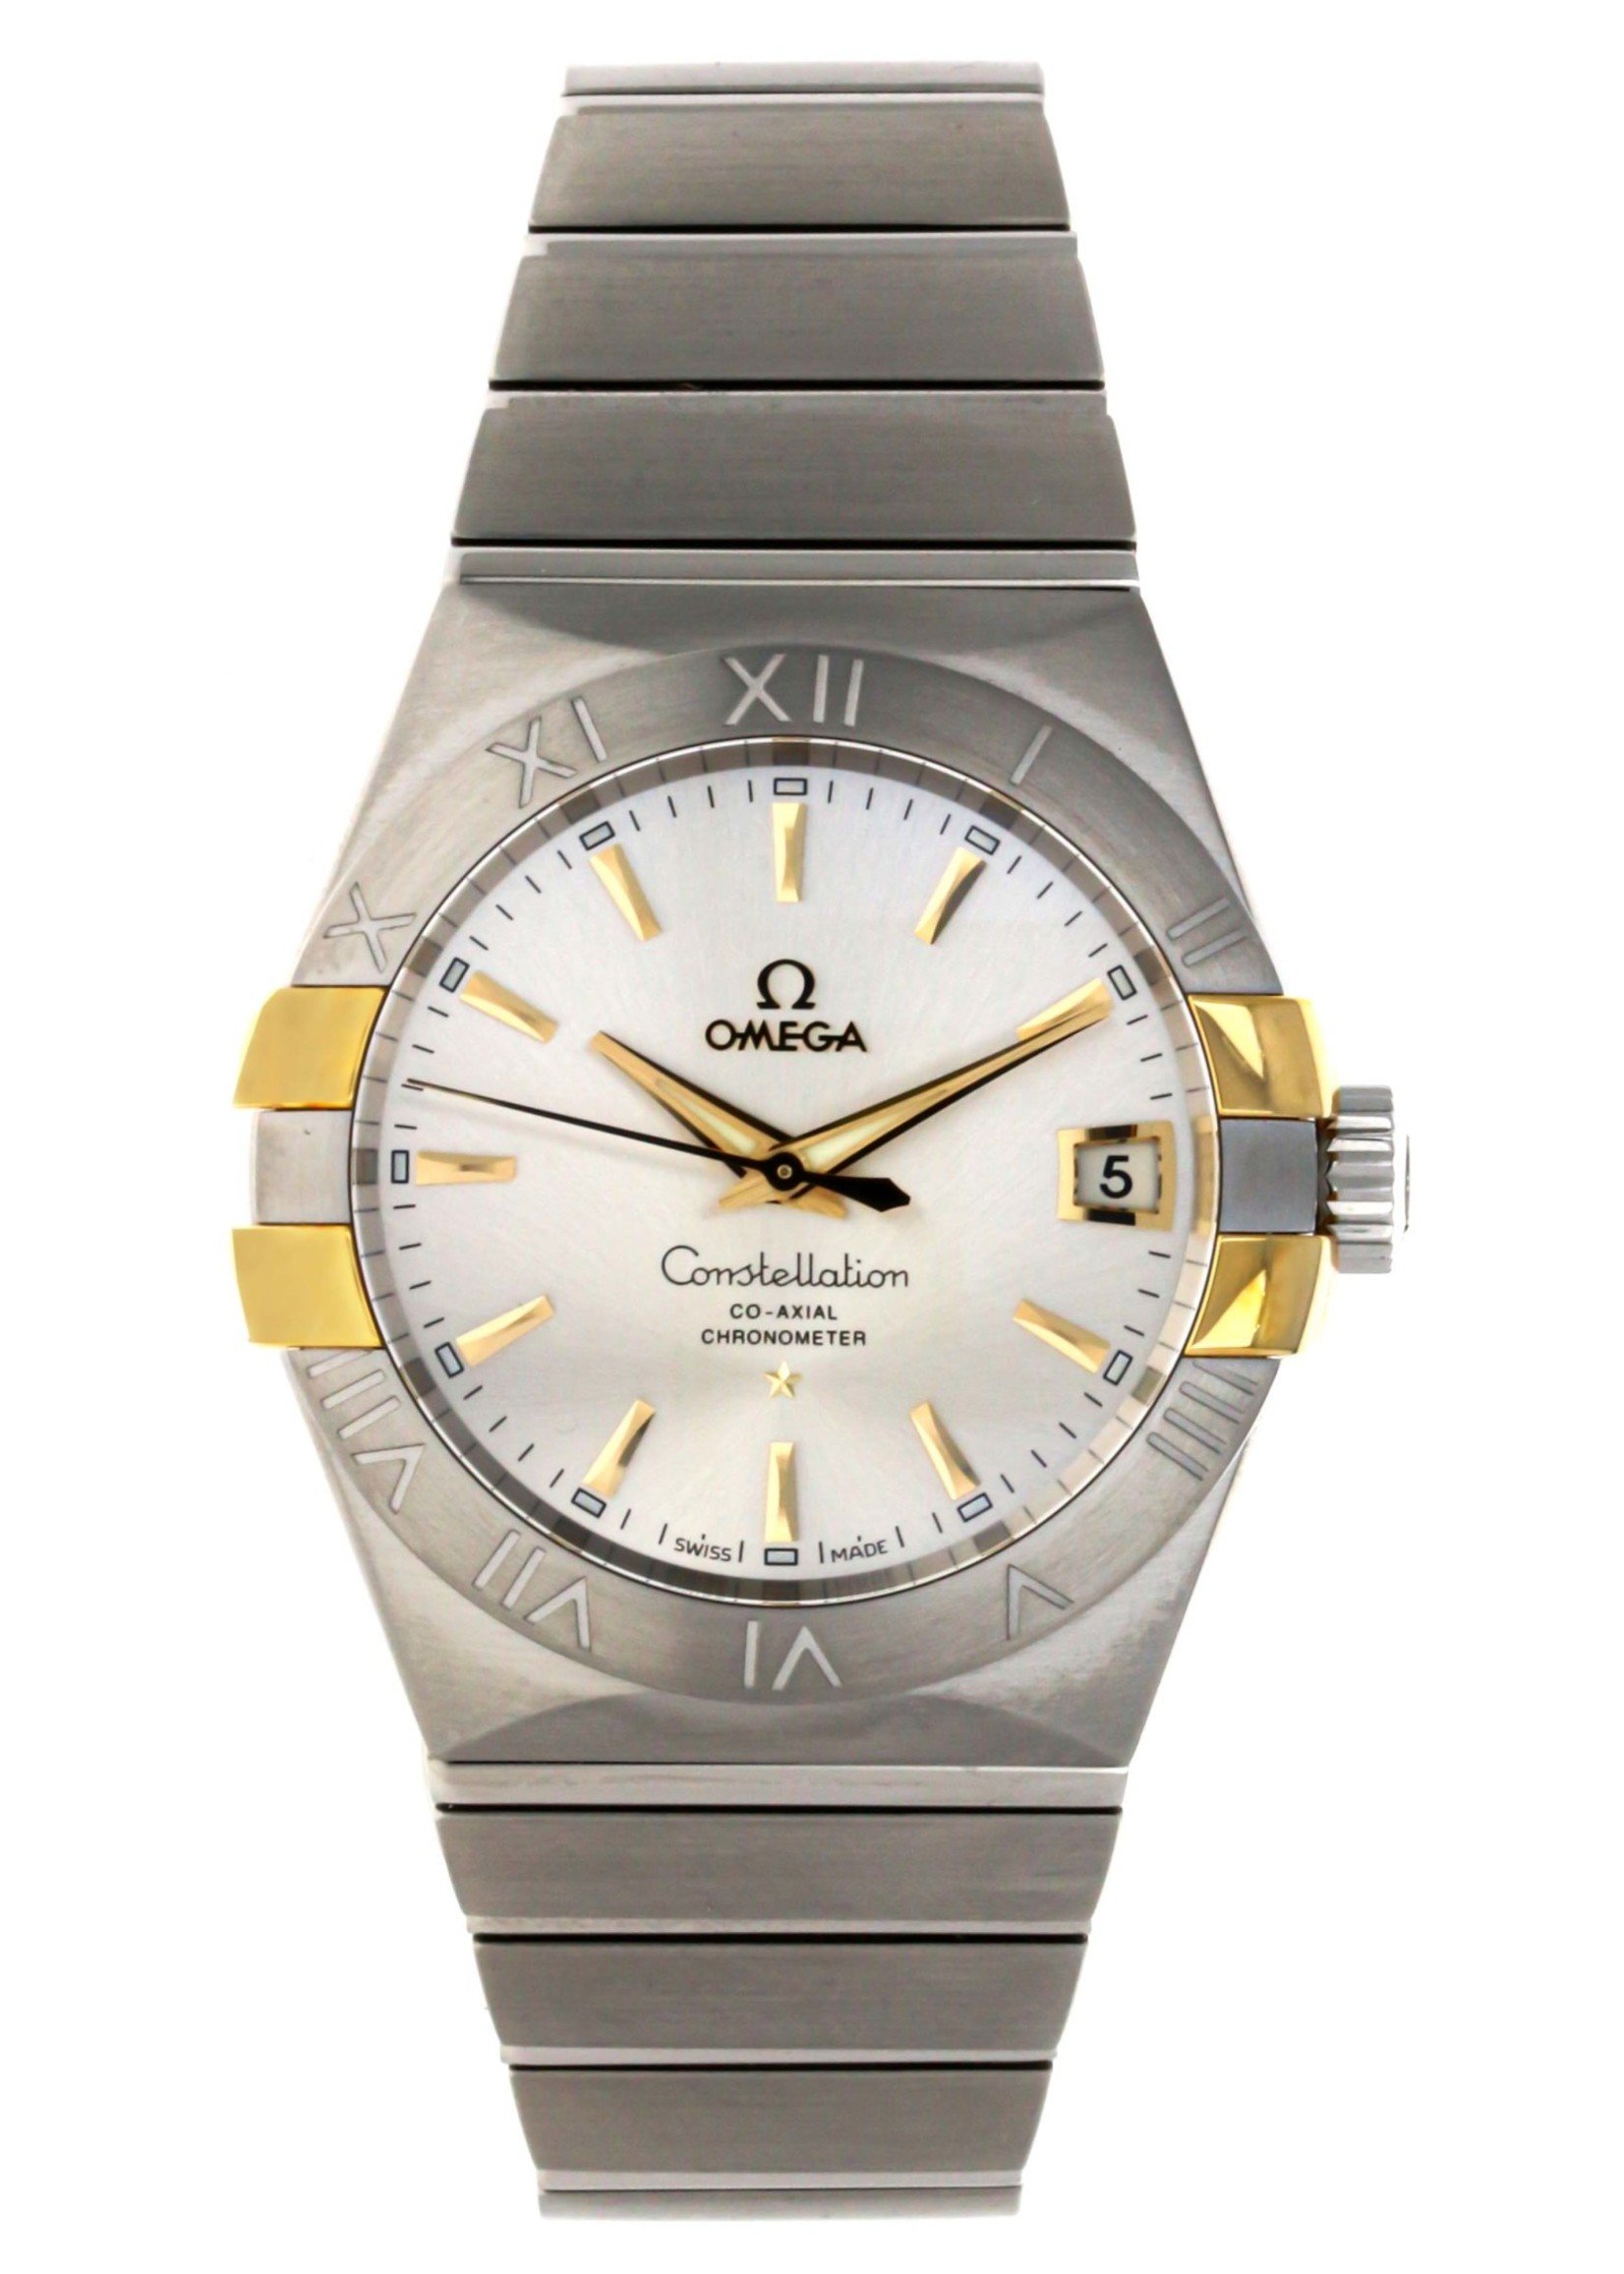 Omega Watches OMEGA CONSTELLATION (2020 B+P) #12320382102005